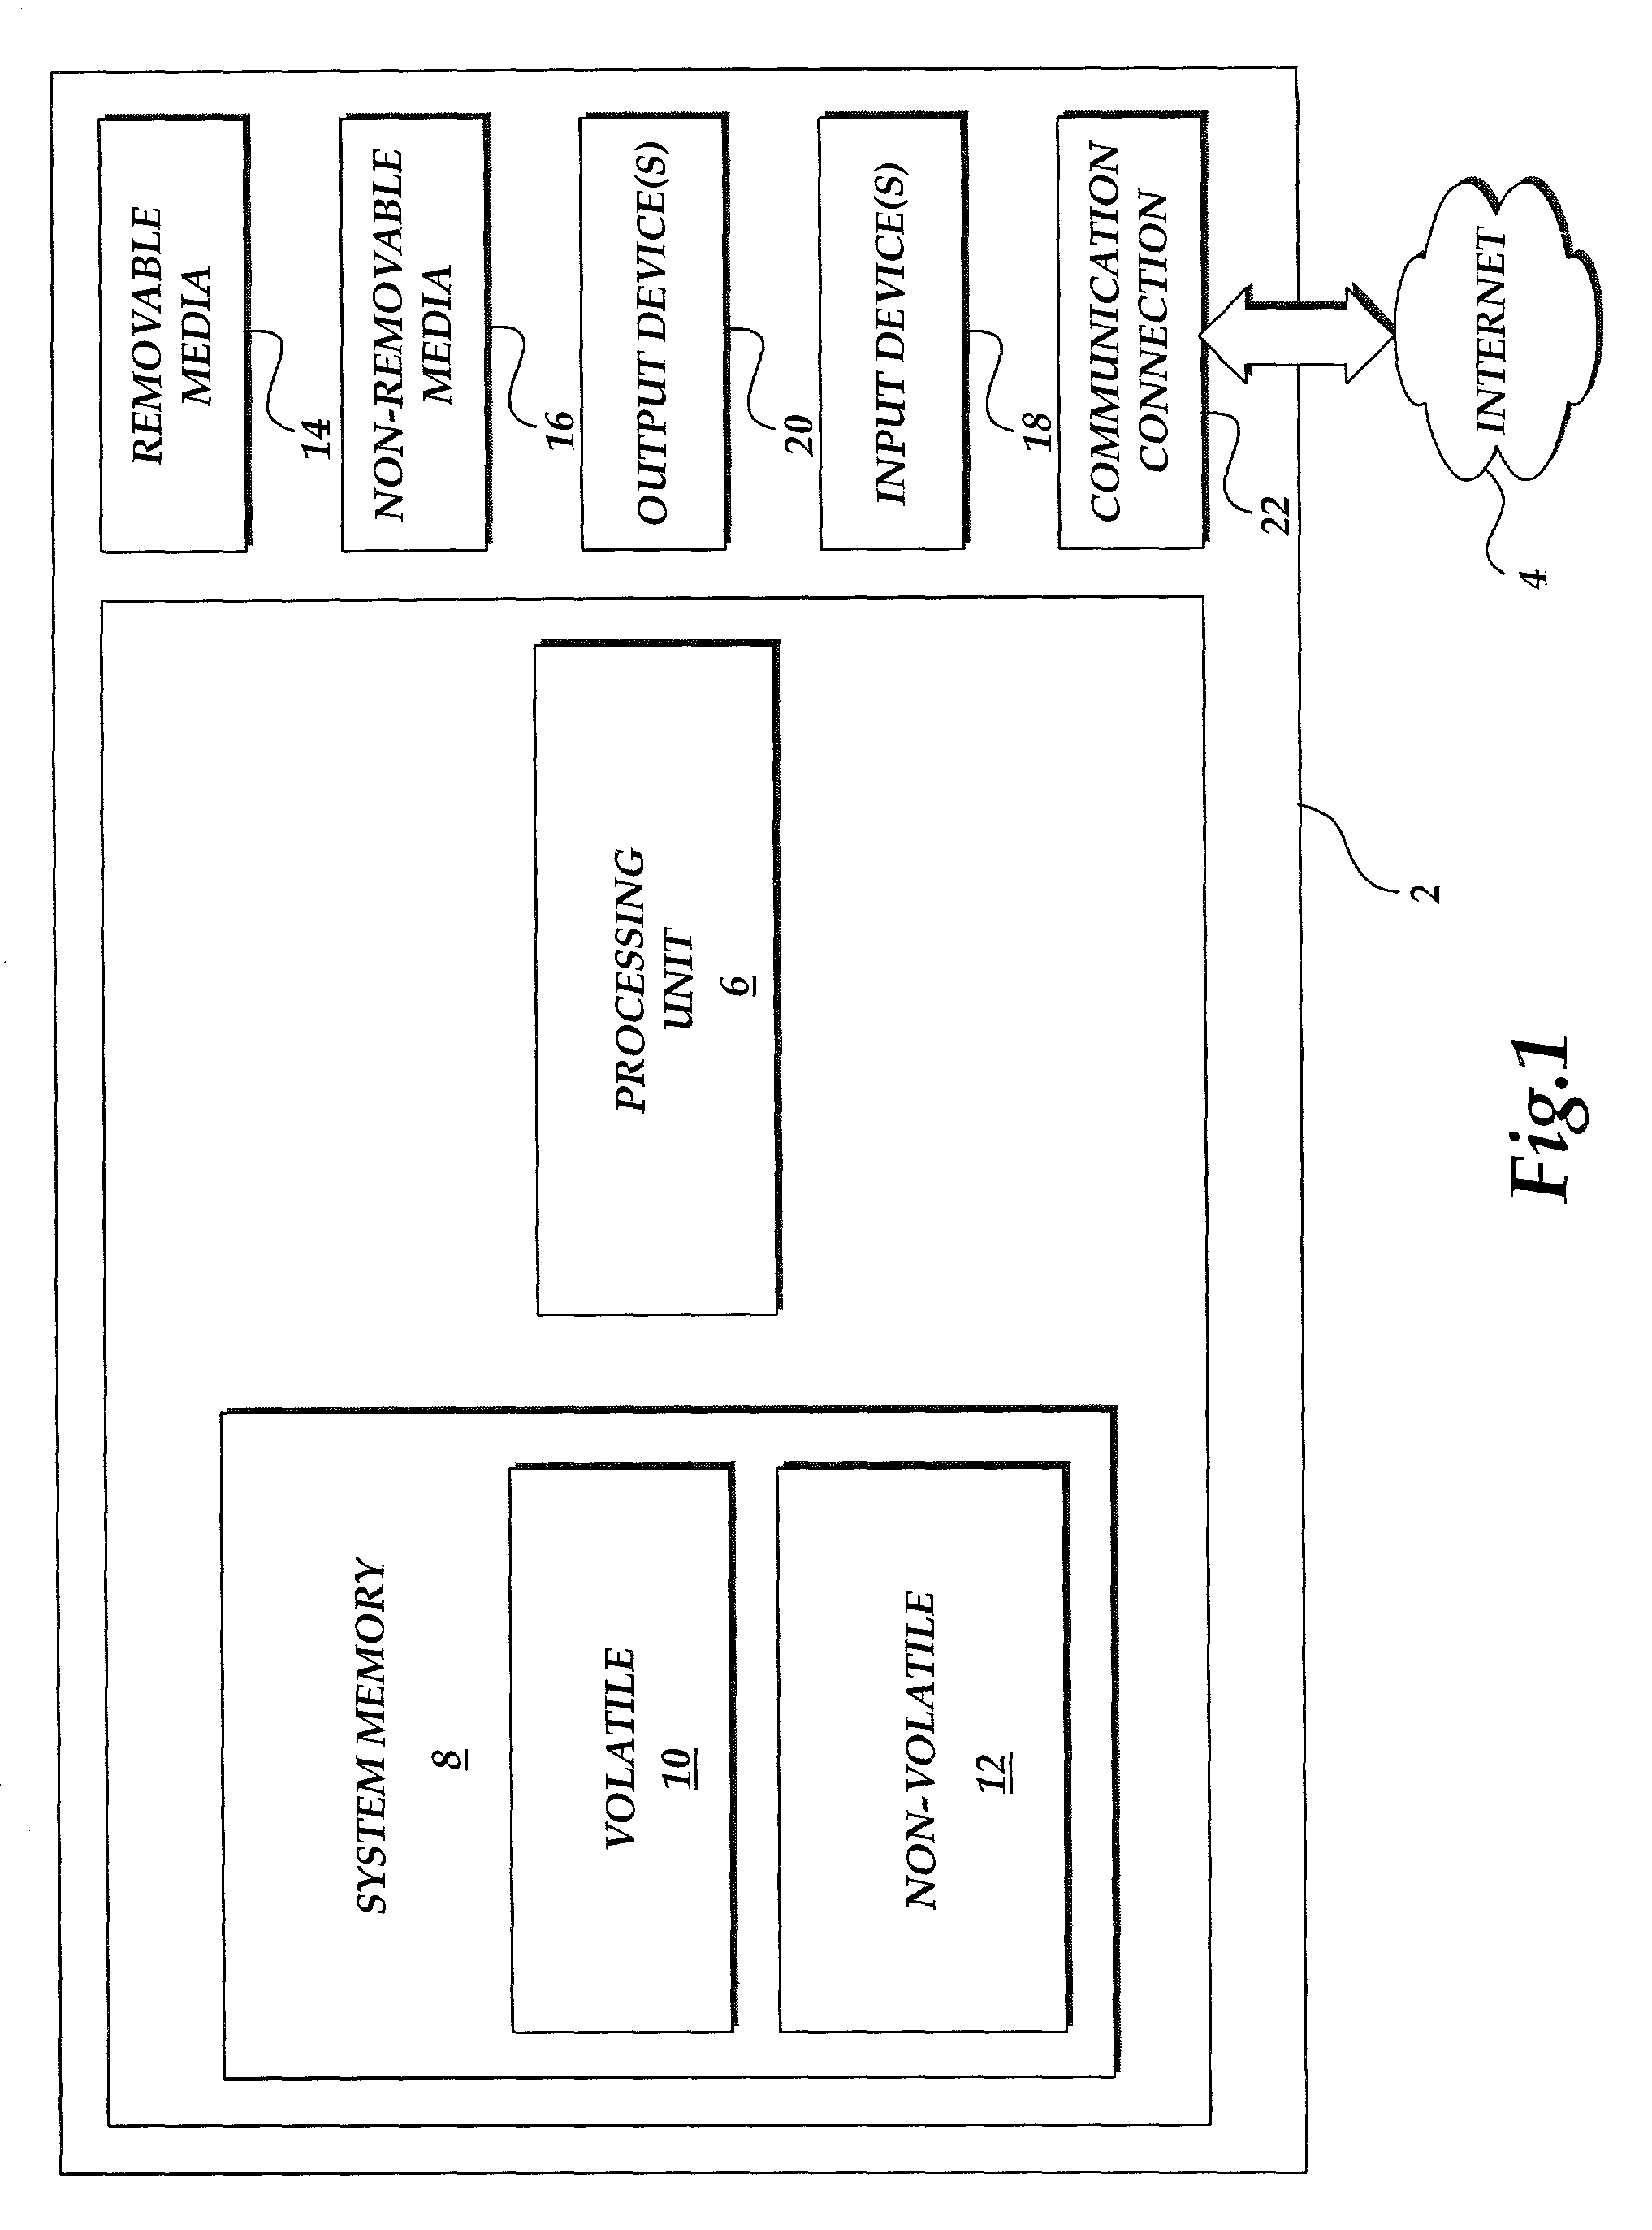 Method and apparatus for providing instrumentation data to an instrumentation data source from within a managed code environment